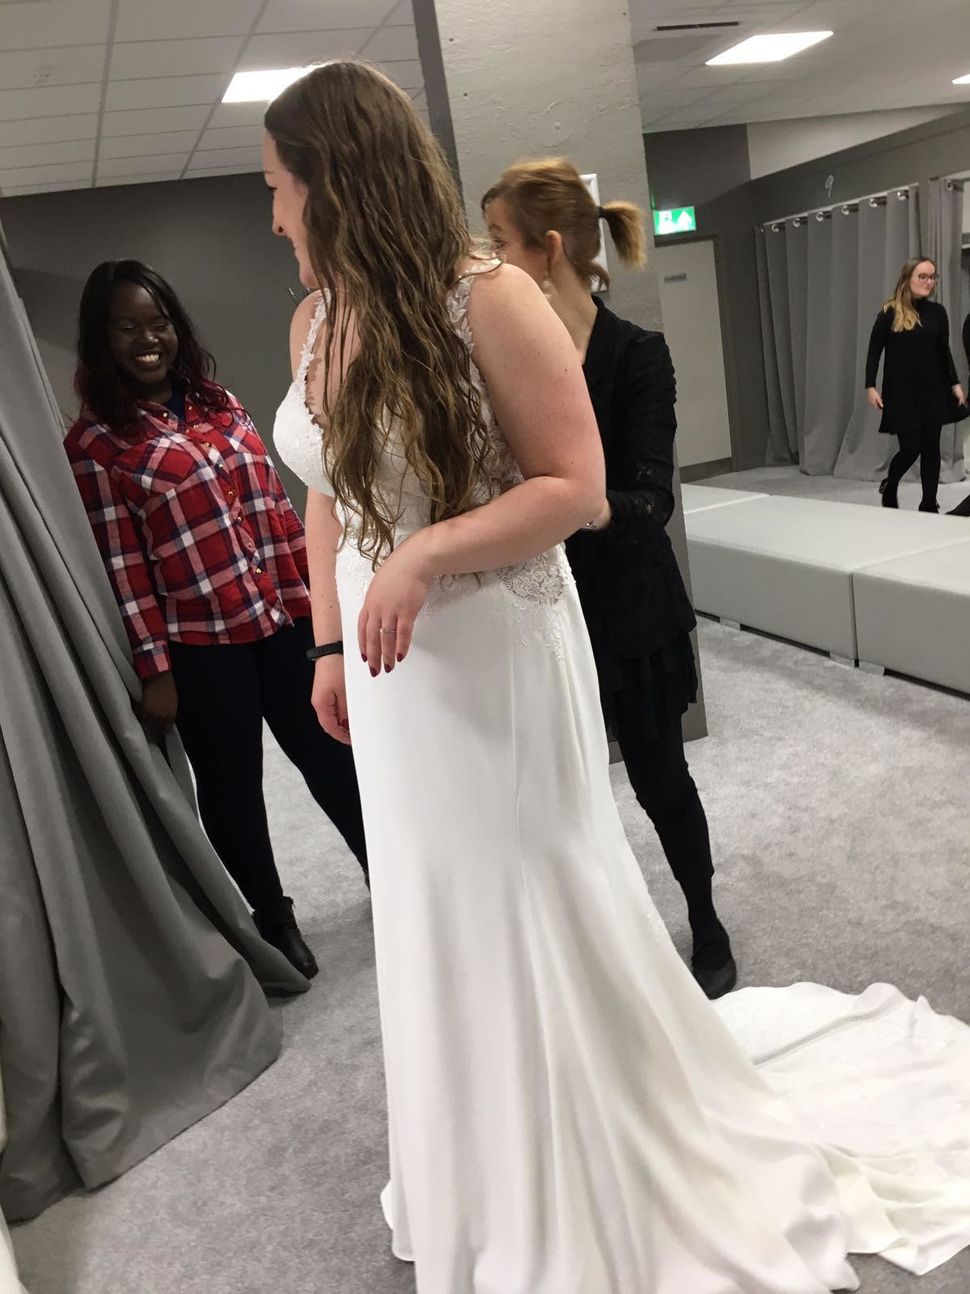 Alexia wearing one of the wedding dresses that didn't make the cut.